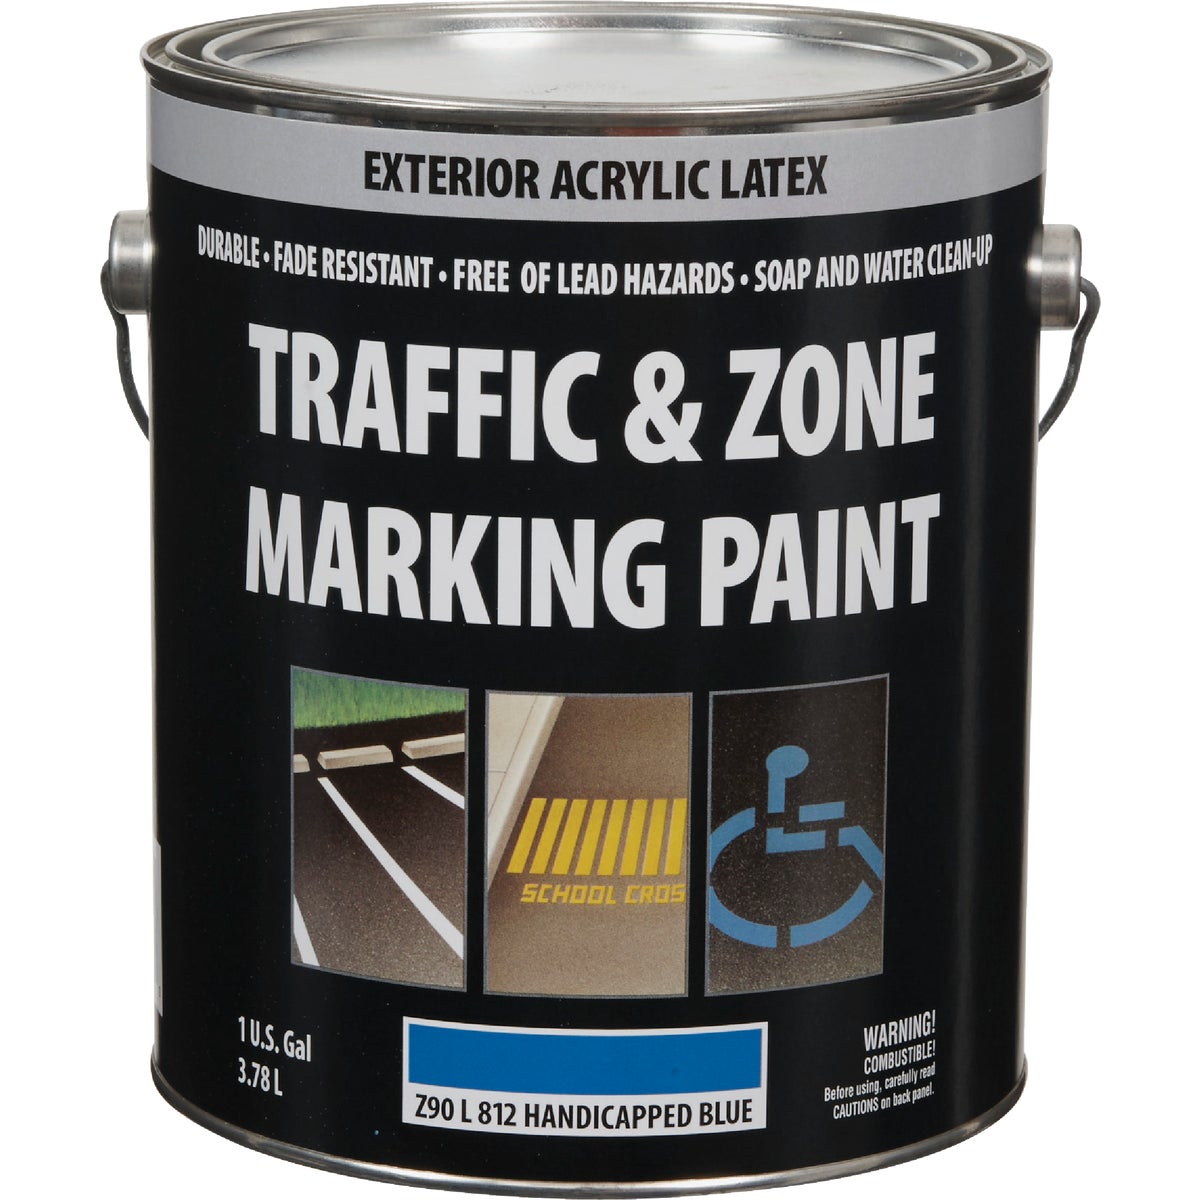 Item 778473, Fast dry marking paints that are designed for streets and parking lots.